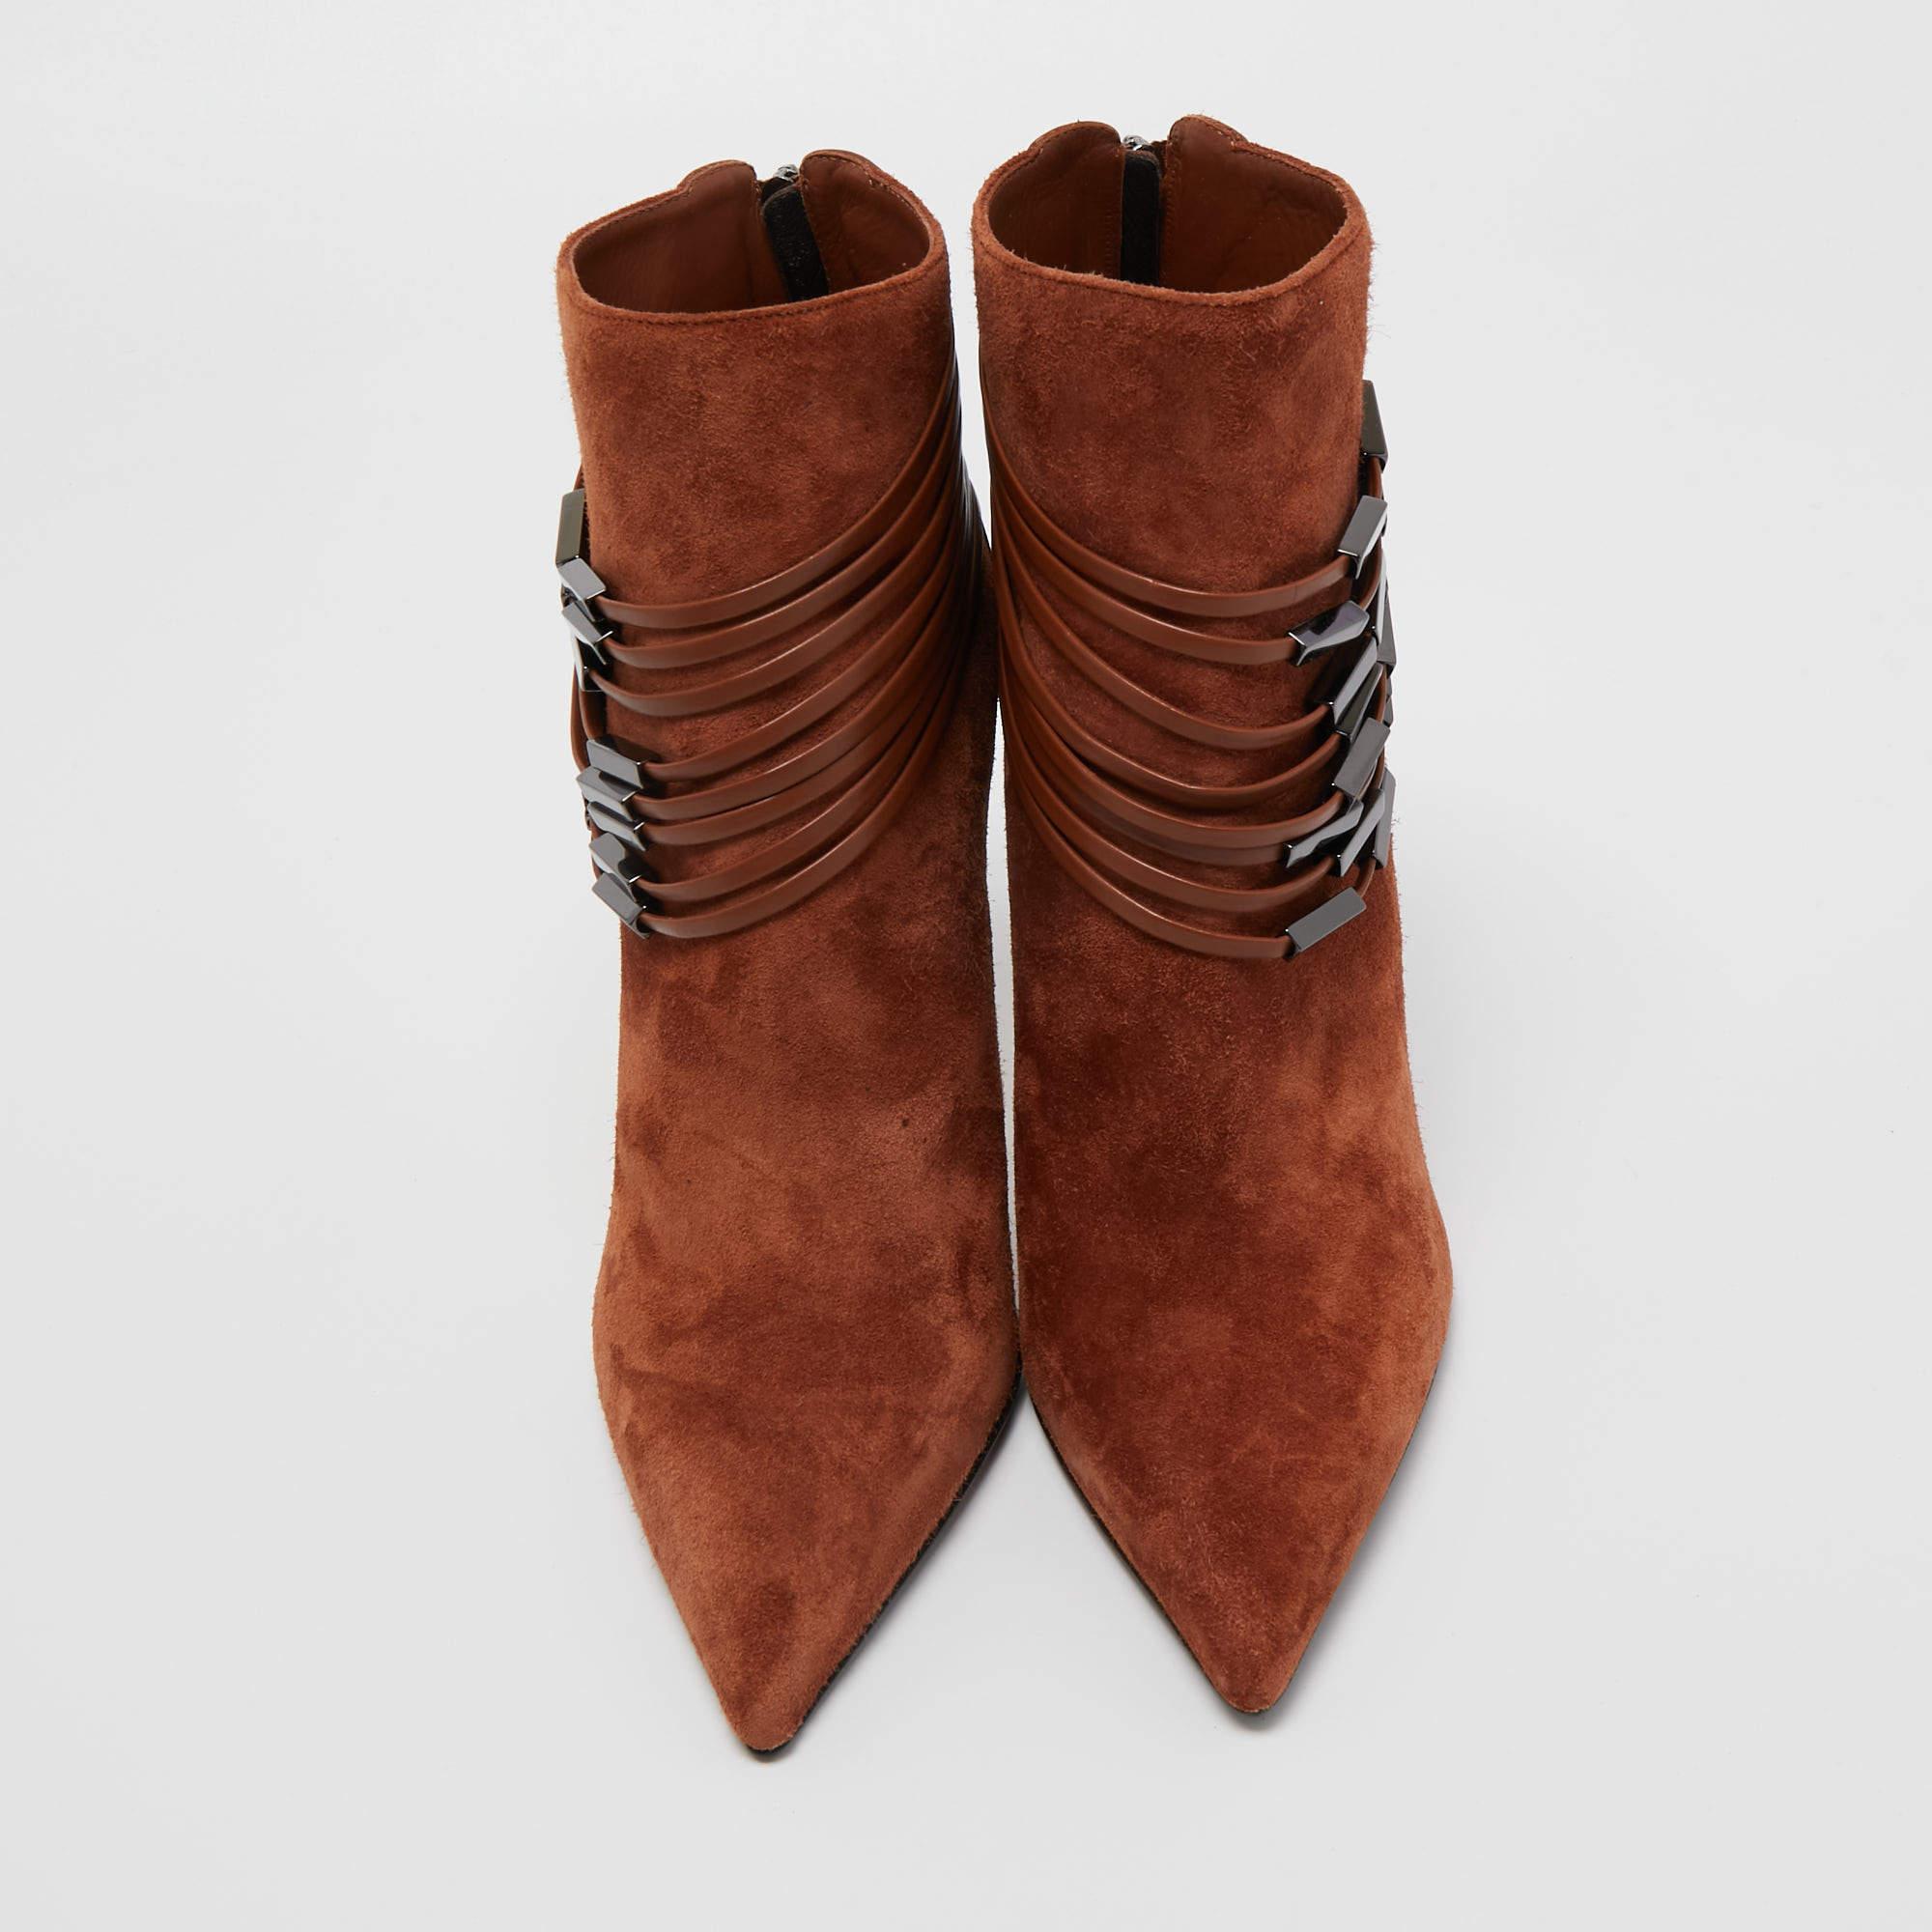 Meticulously designed into a smart silhouette, these boots are on-point with style. They come with comfortable insoles and durable outsoles to last you forever. These boots are just amazing, and you definitely need to get them right away.

Includes: